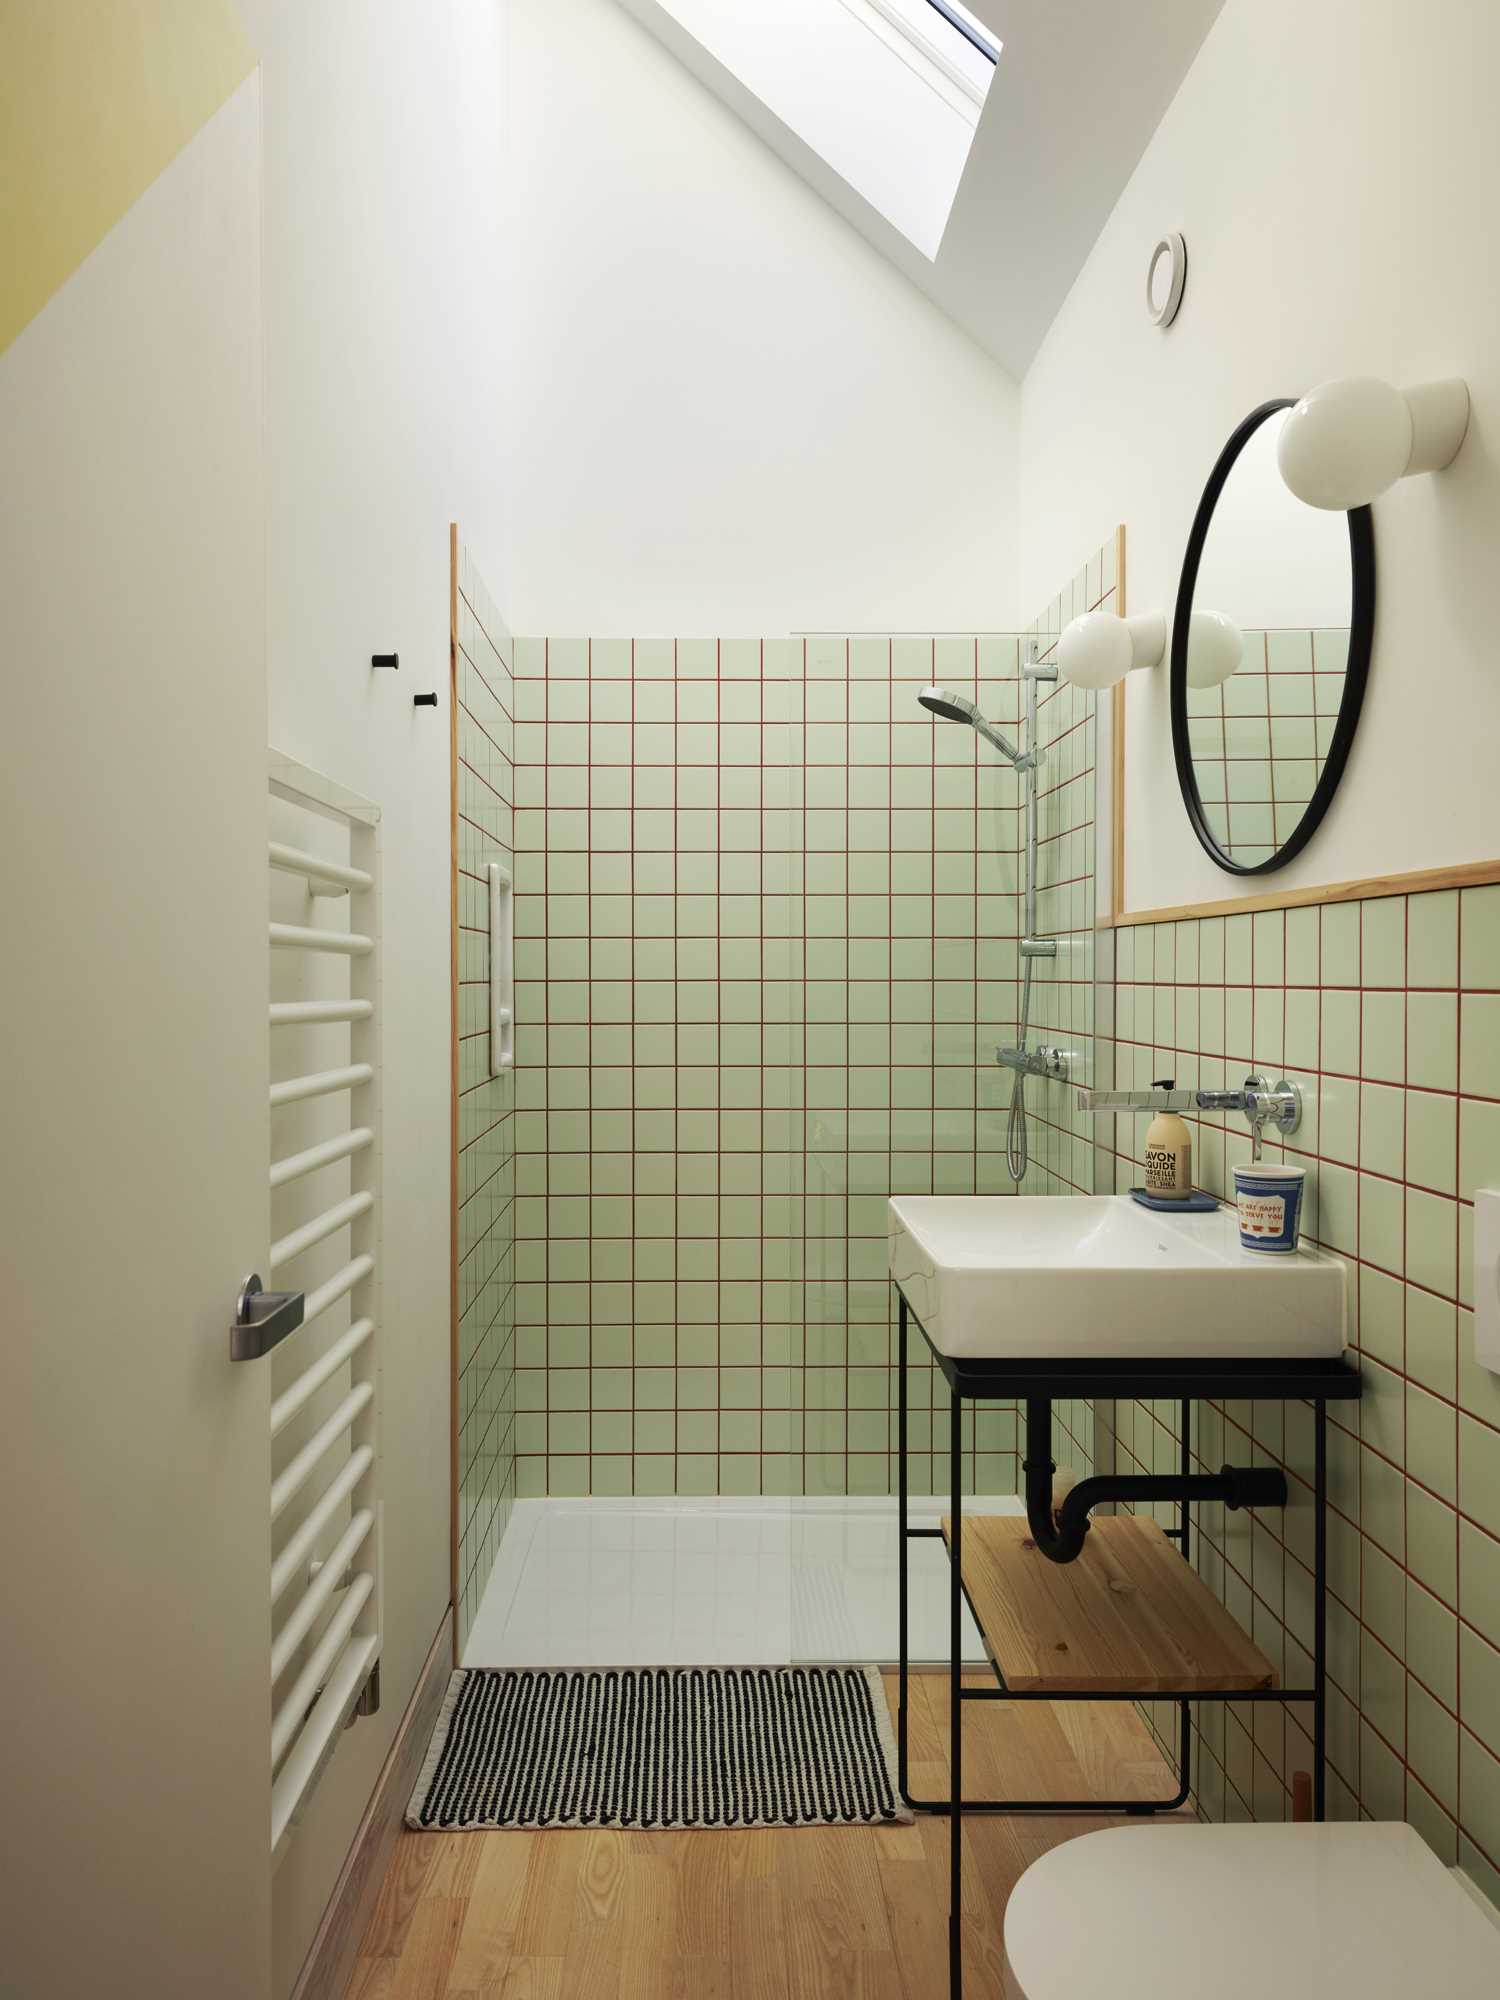 In this bathroom, the s،wer walls and vanity area are clad in square green tiles with colored grout.